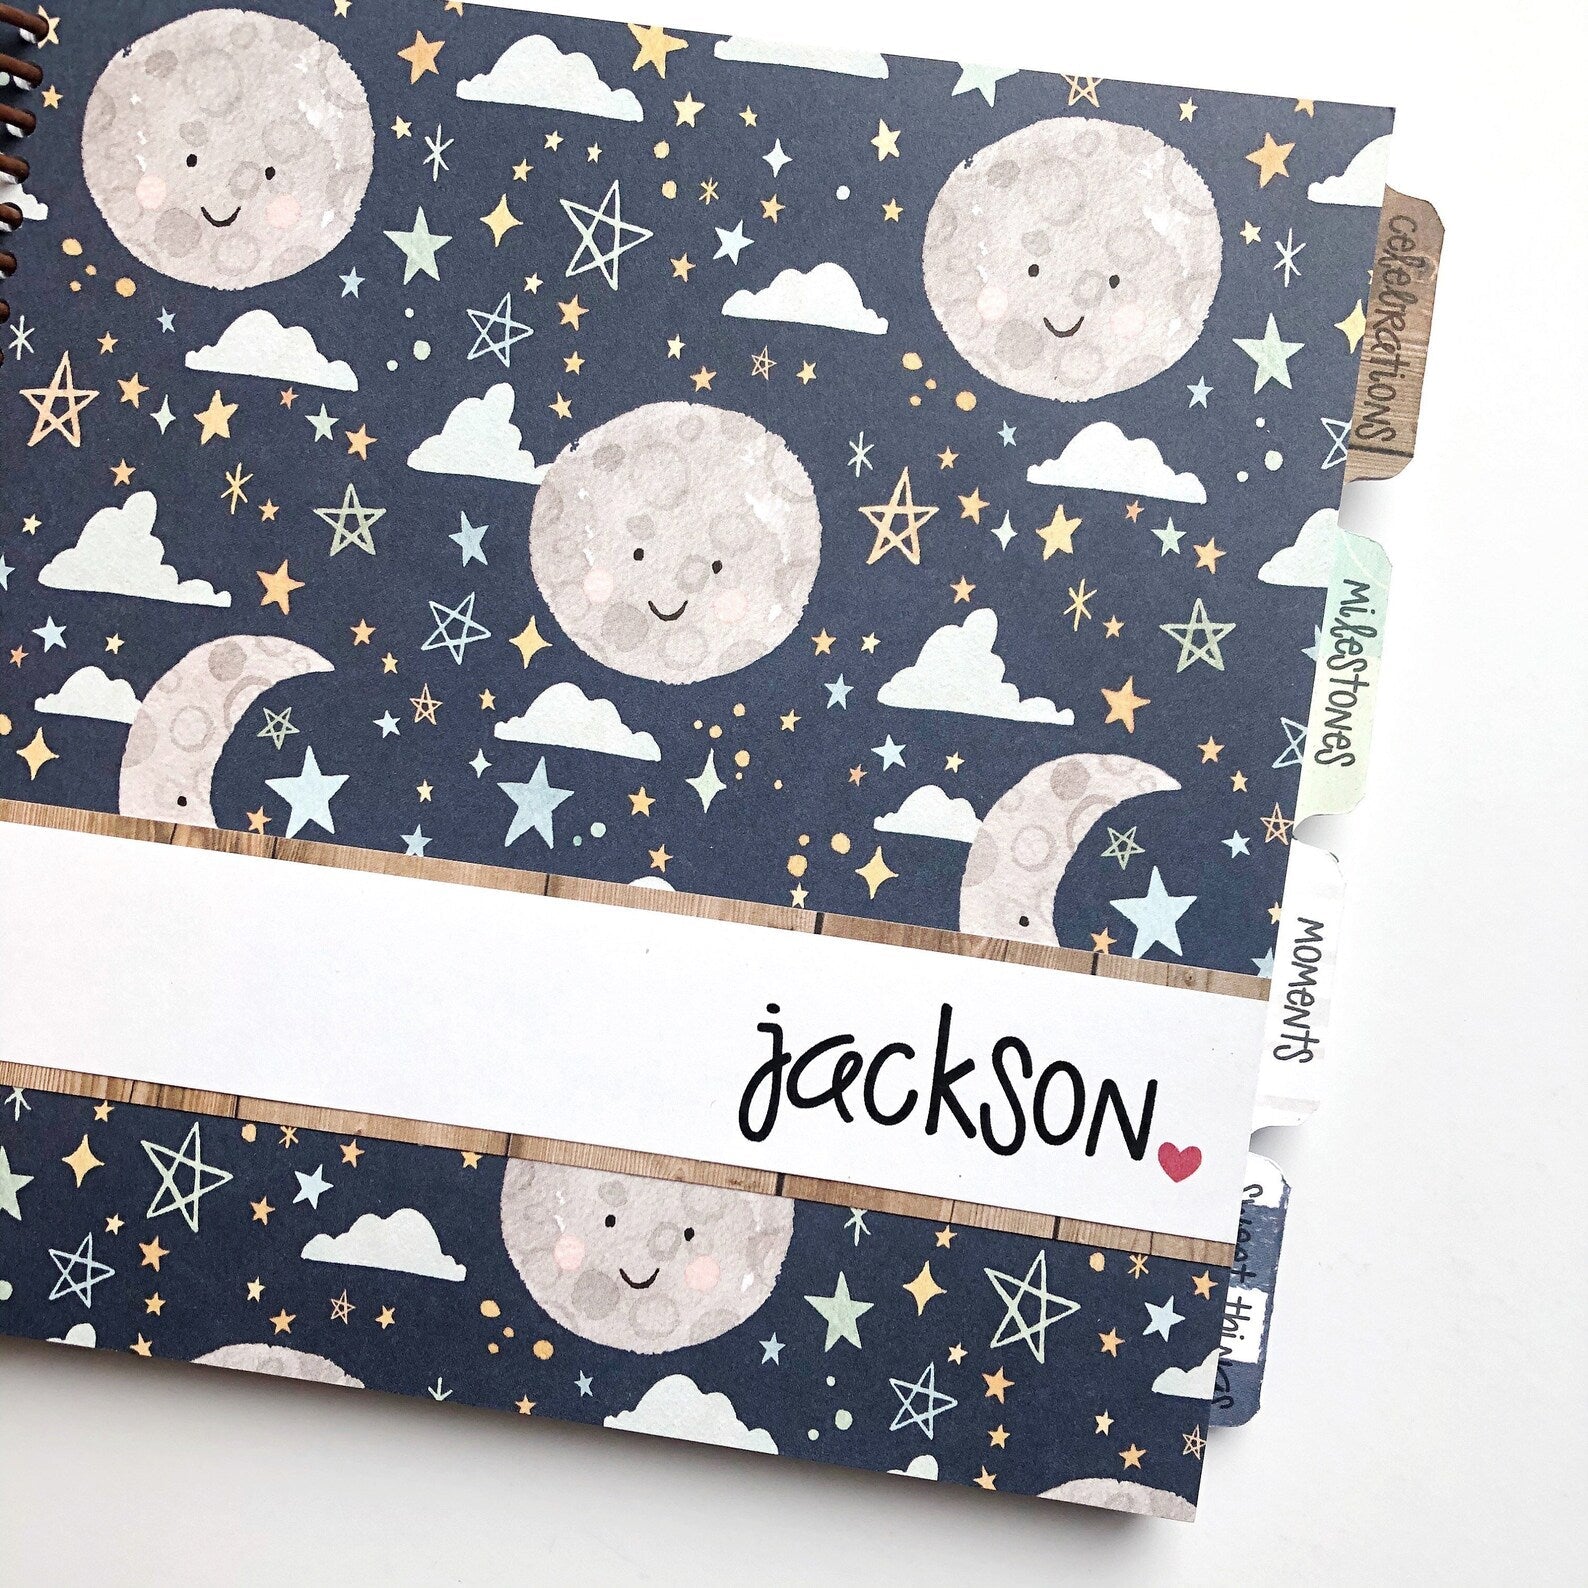 Baby Photo Books, Personalised Baby Albums